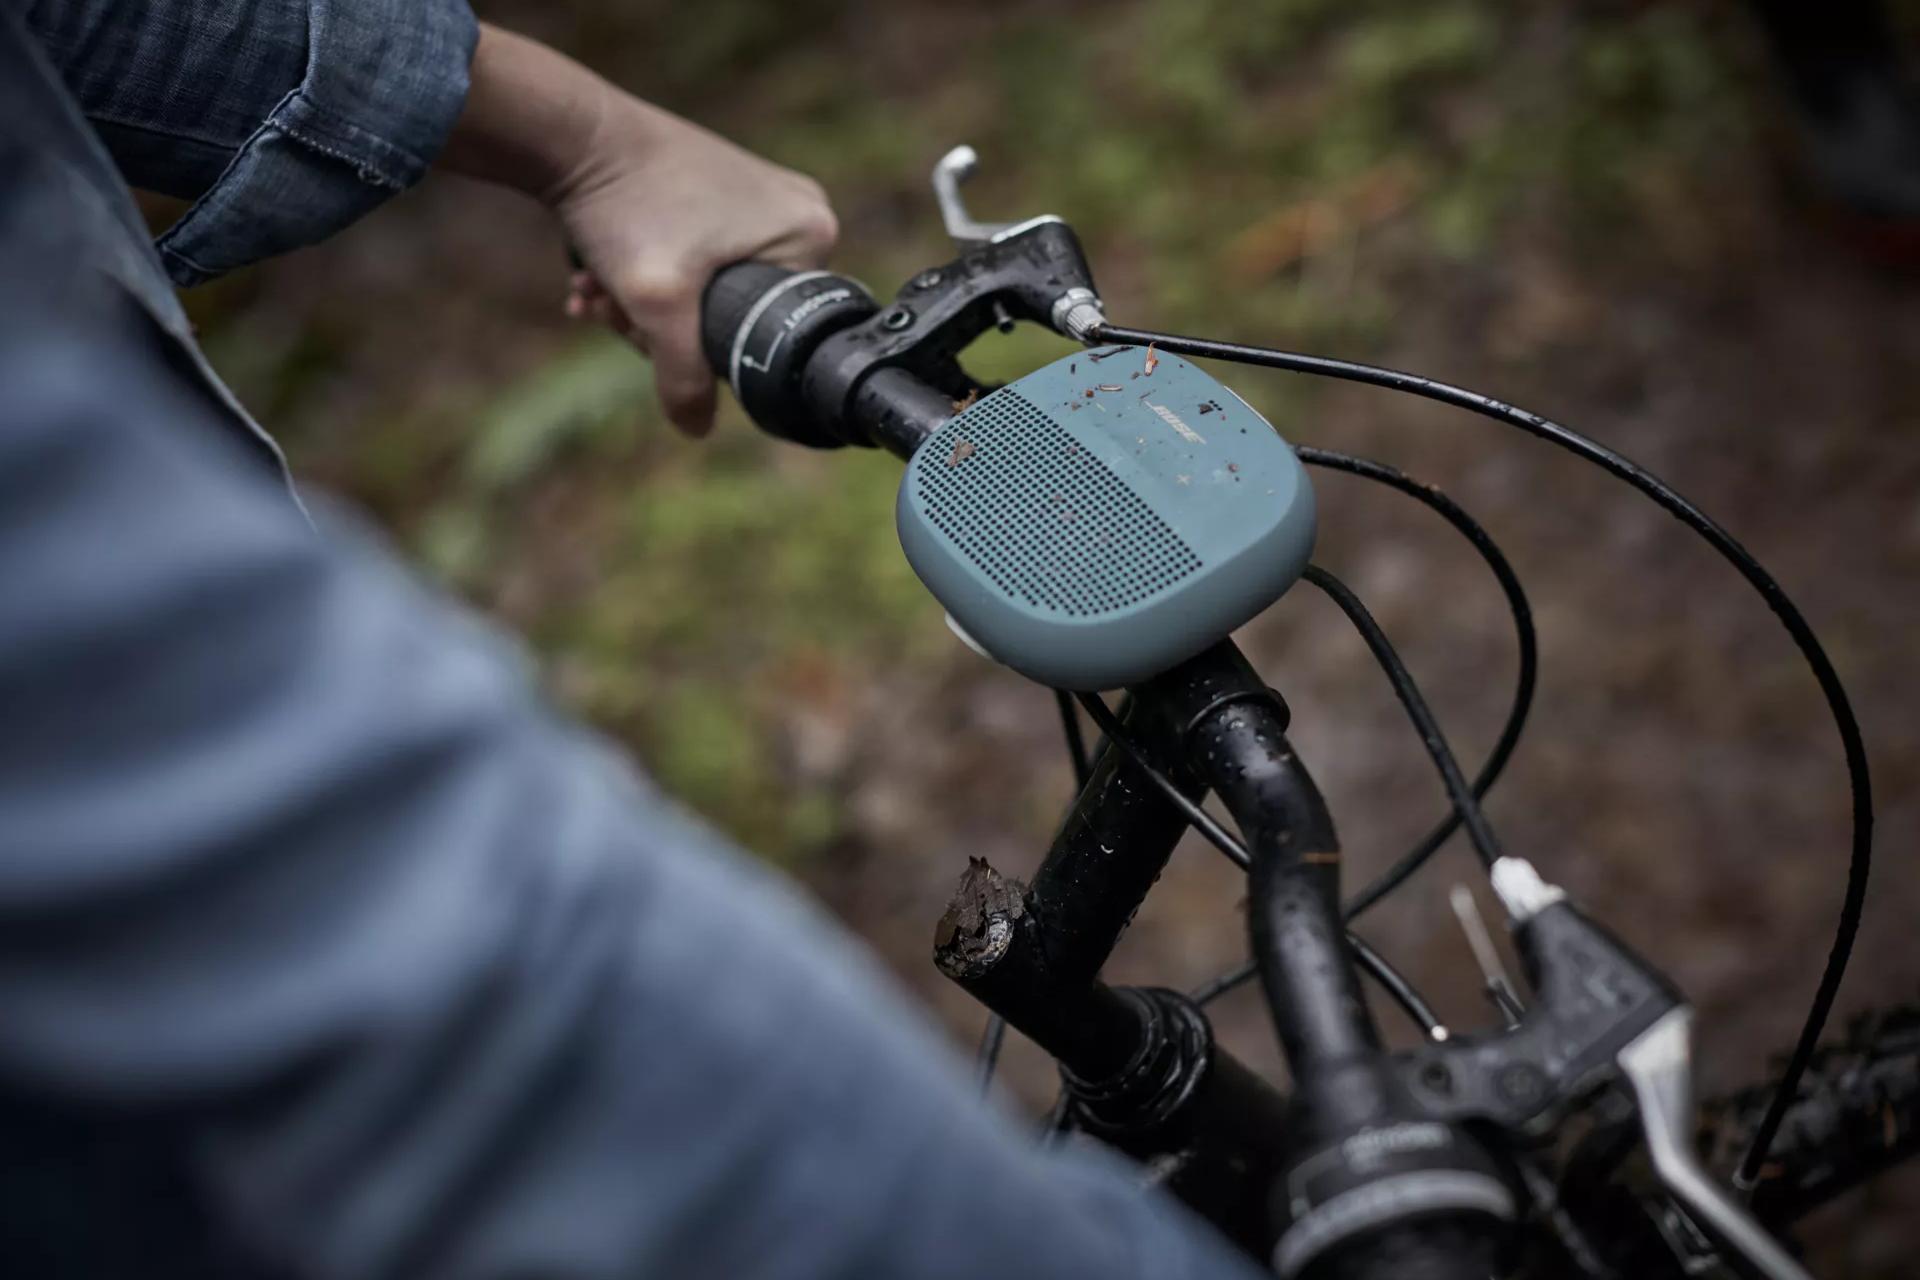 SoundLink Micro Bluetooth Speaker attached to handlebars of a bike